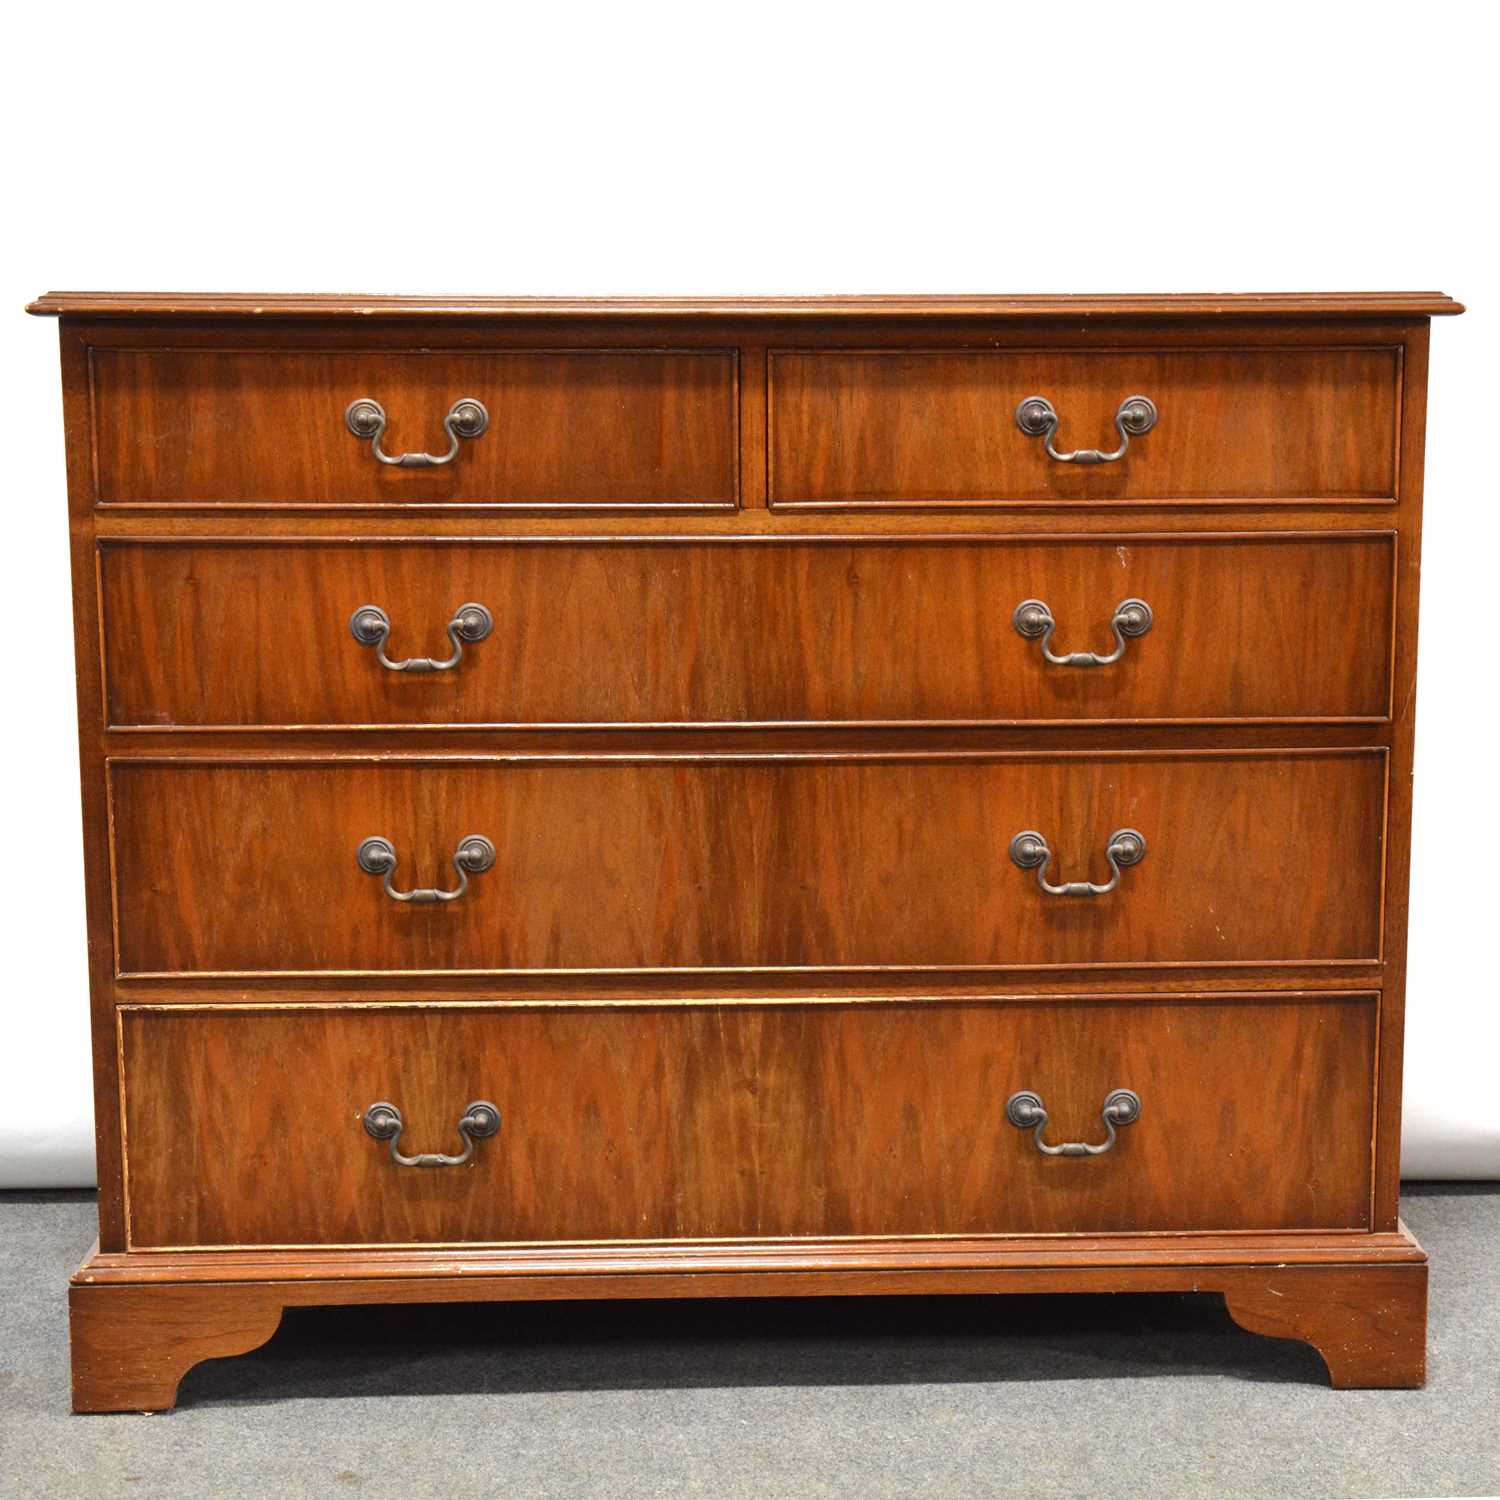 George III style mahogany chest of drawers.